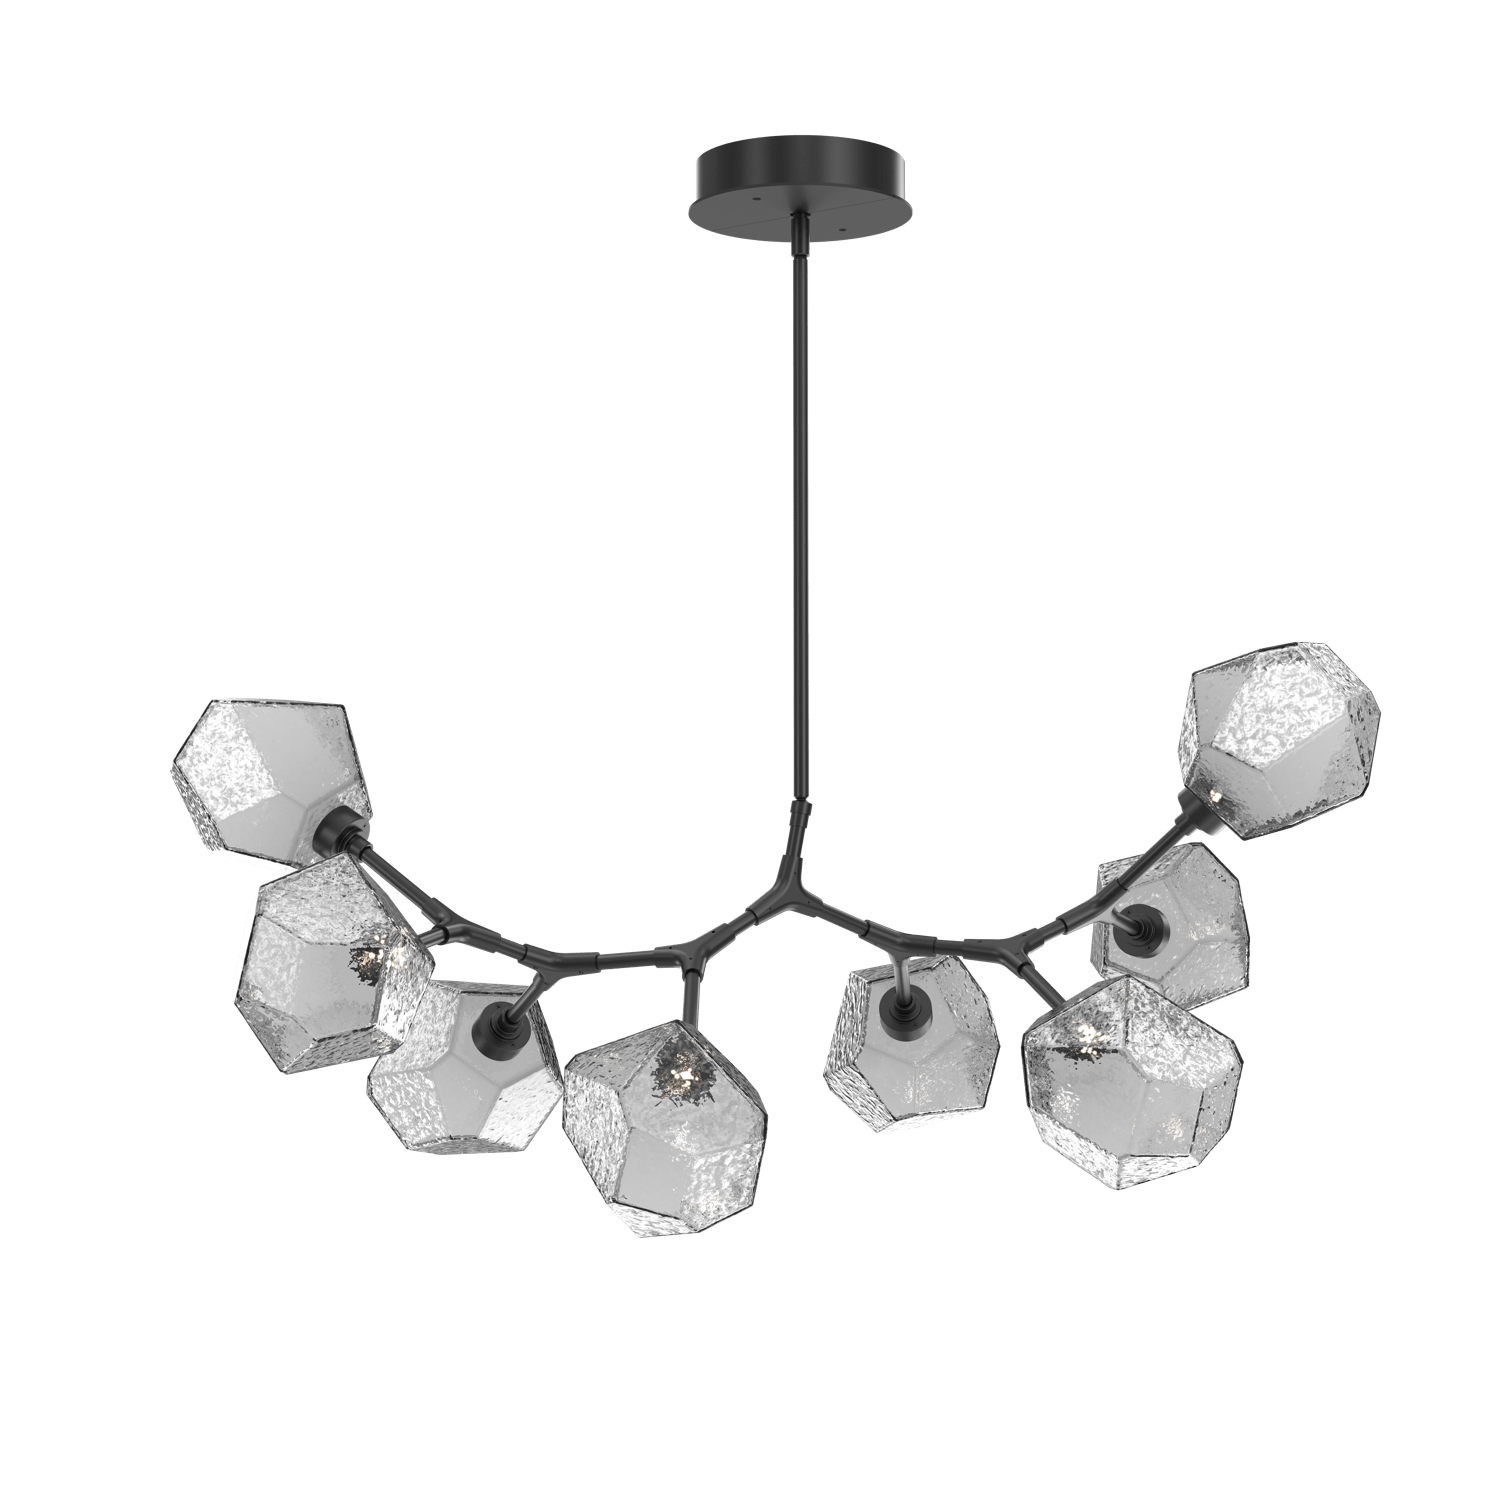 PLB0039-BB-MB-S-Hammerton-Studio-Gem-8-light-modern-branch-chandelier-with-matte-black-finish-and-smoke-blown-glass-shades-and-LED-lamping